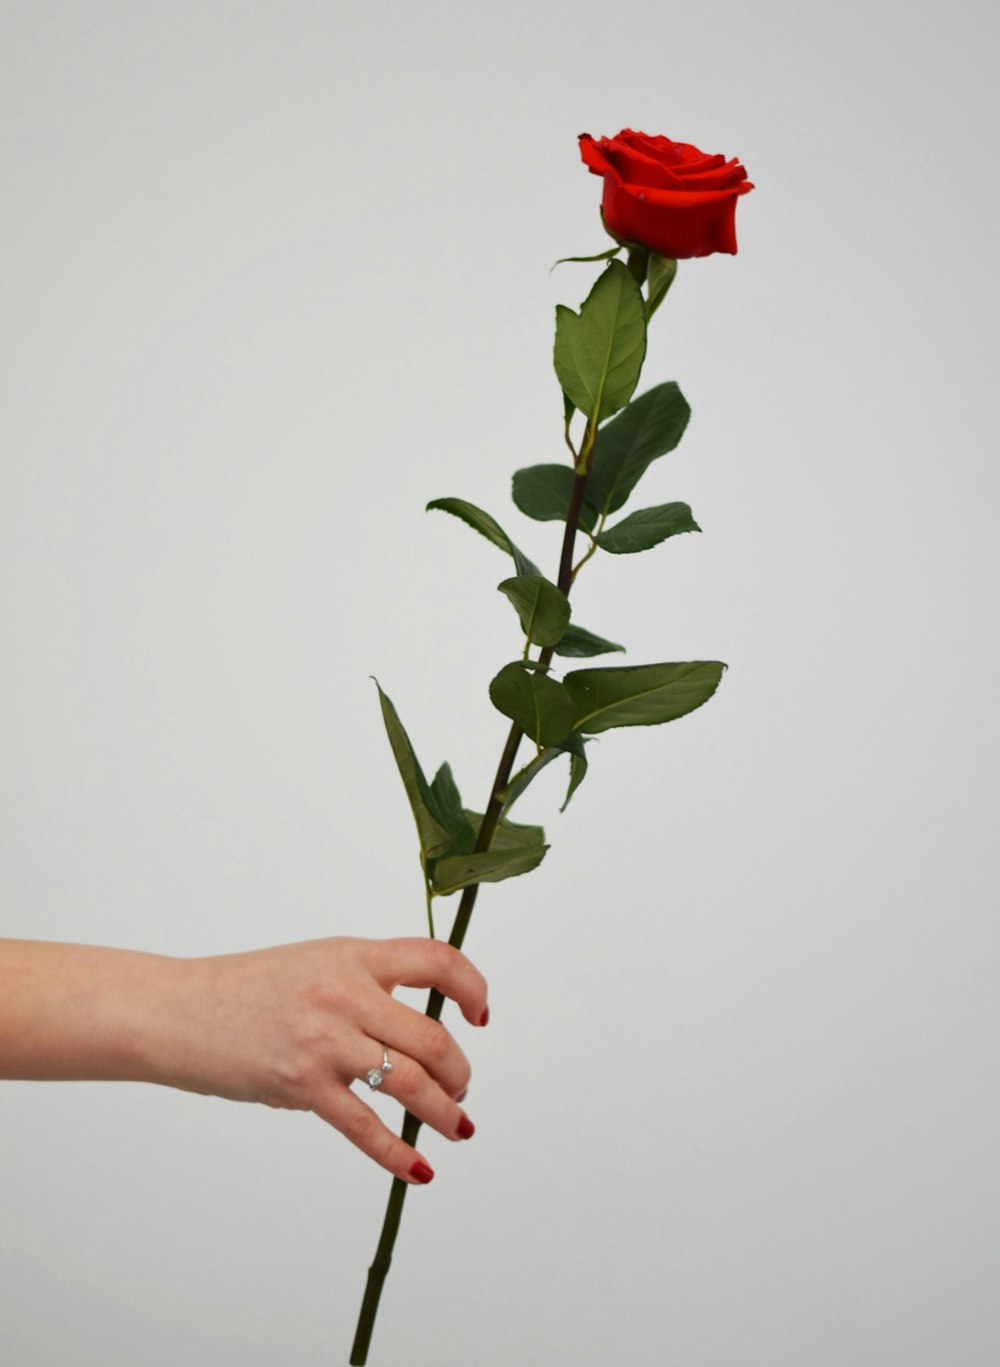 person holding red rose with green leaves